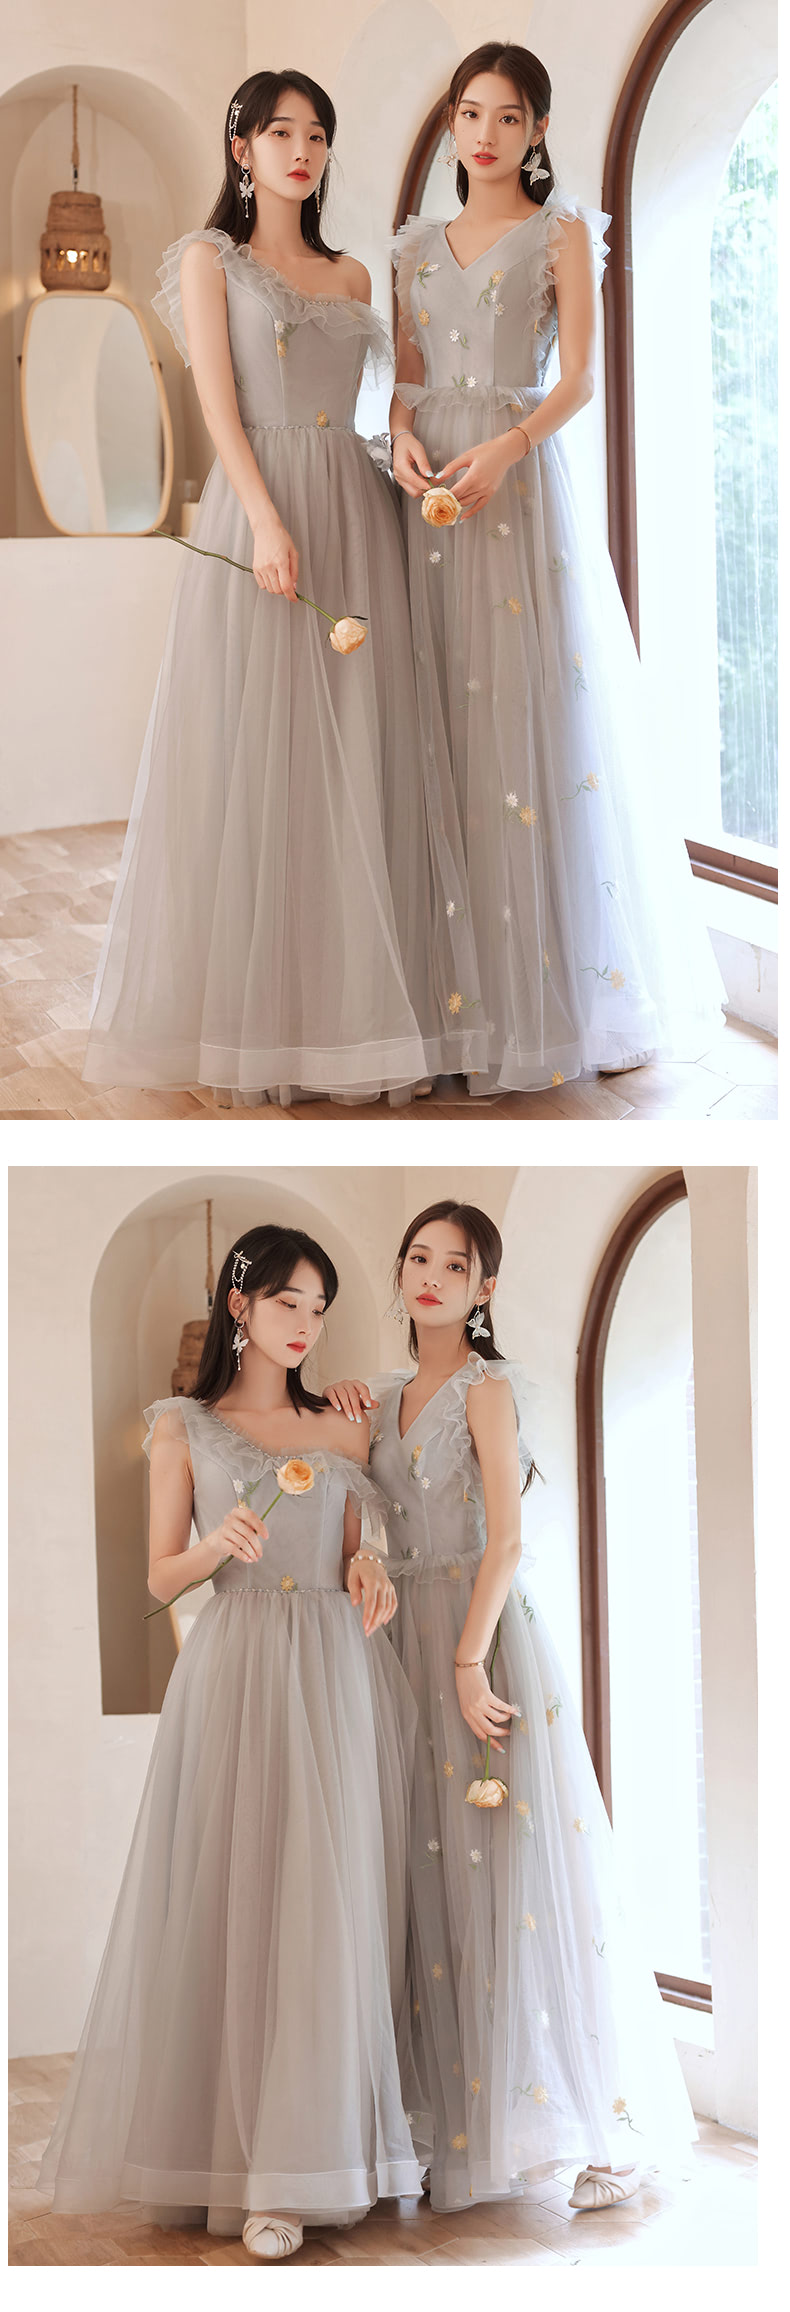 Womens-A-line-Gray-Floral-Bridal-Party-Evening-Bridesmaid-Dress13.jpg